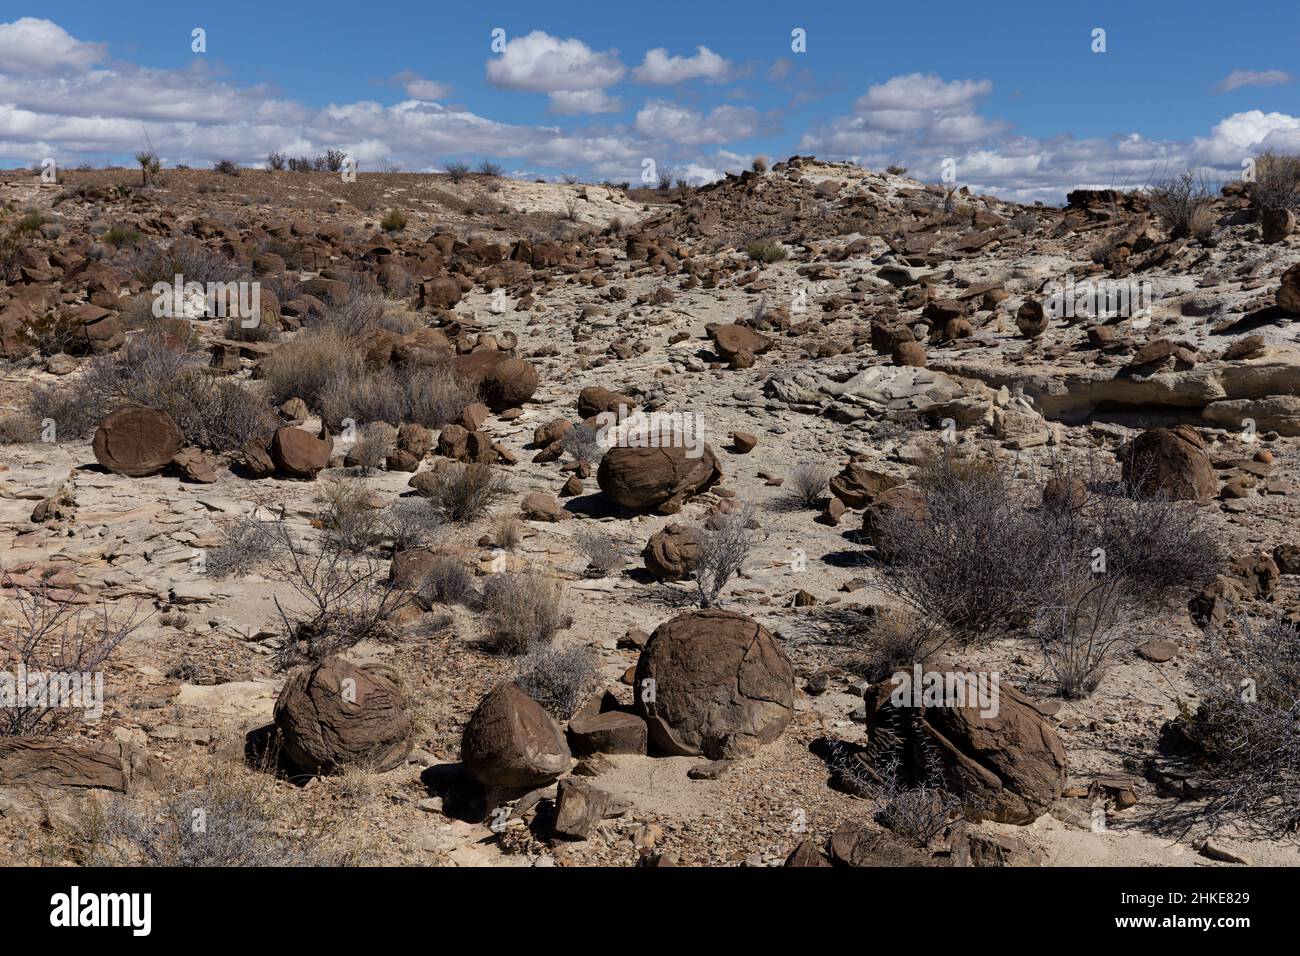 Concretions weathered out of Cretaceous deposits litter the ground. Stock Photo